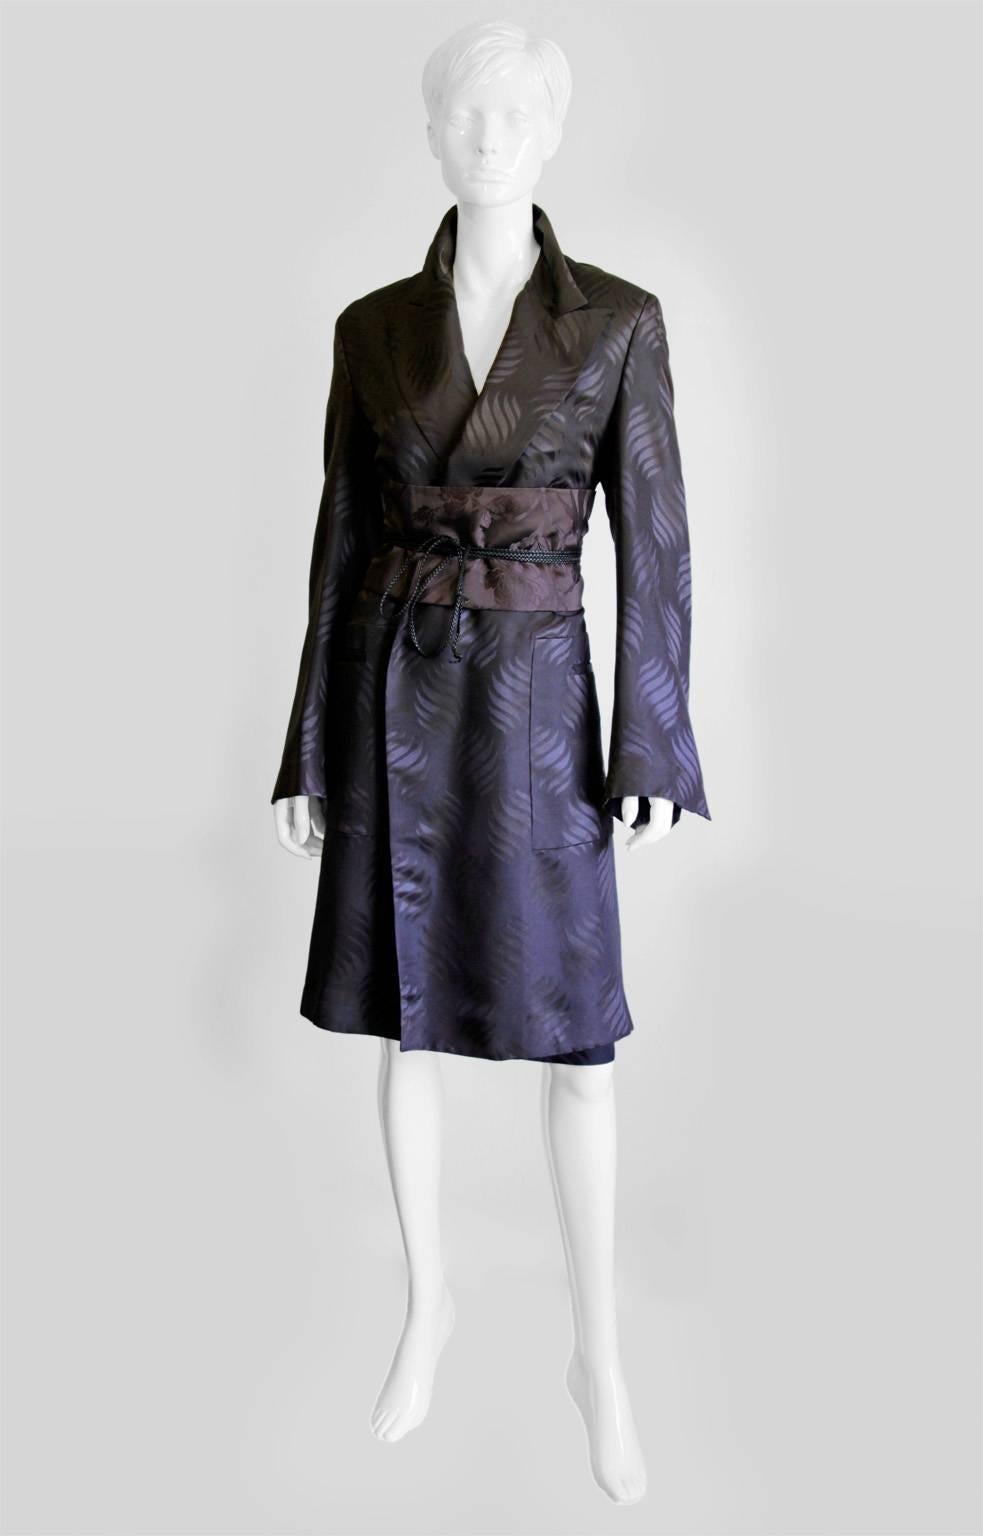 That Rare & Iconic Tom Ford For Gucci Fall Winter 2002 Aubergine Silk Kimono Coat, Obi Belt & Skirt! 38

Who could ever forget Tom Ford's fall/winter 2002 Gothic Collection for Gucci... with that dark chinoiseriesque styling & heavenly detailing?